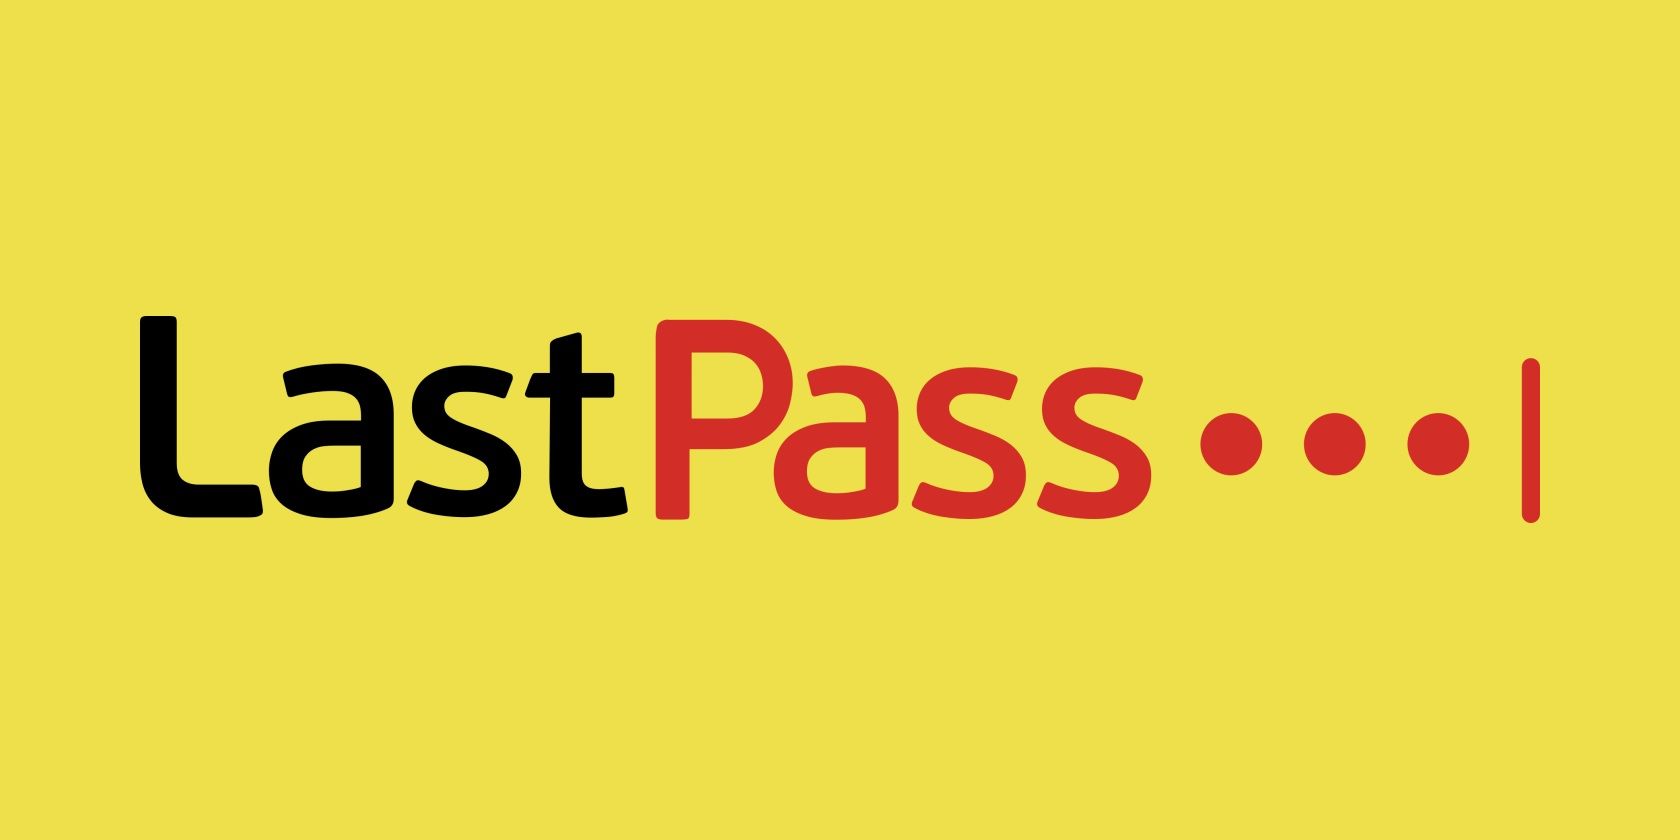 How Do I Get Rid of My LastPass Account?